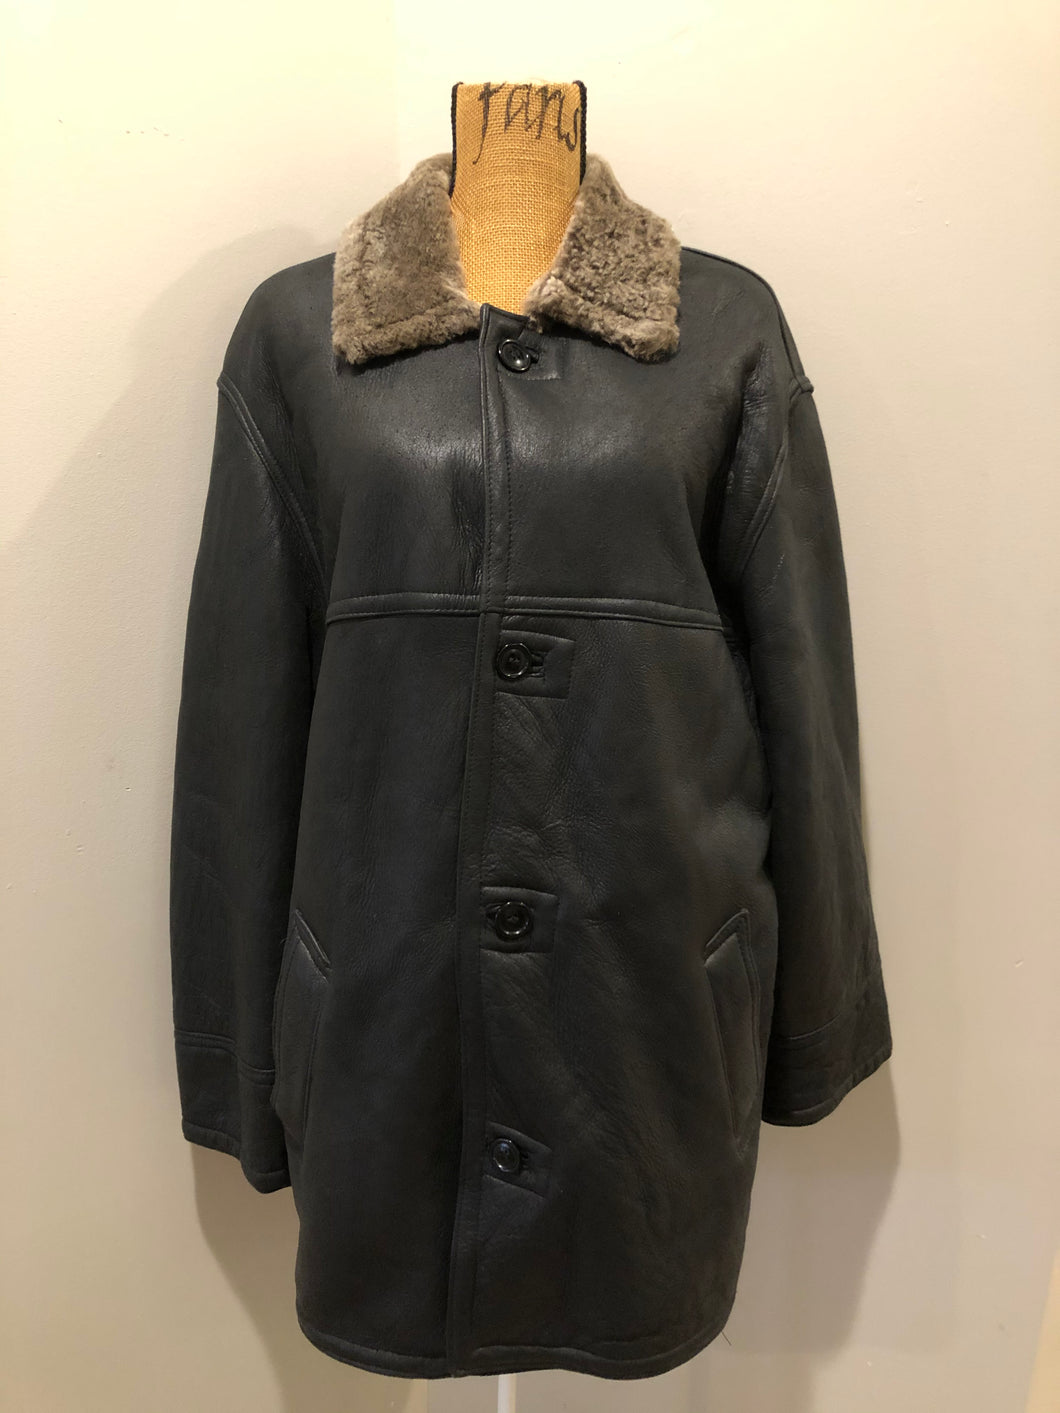 Kingspier Vintage - Keep Basic dark brown smooth leather shearling coat with button closures and three patch pockets. Made in Italy.